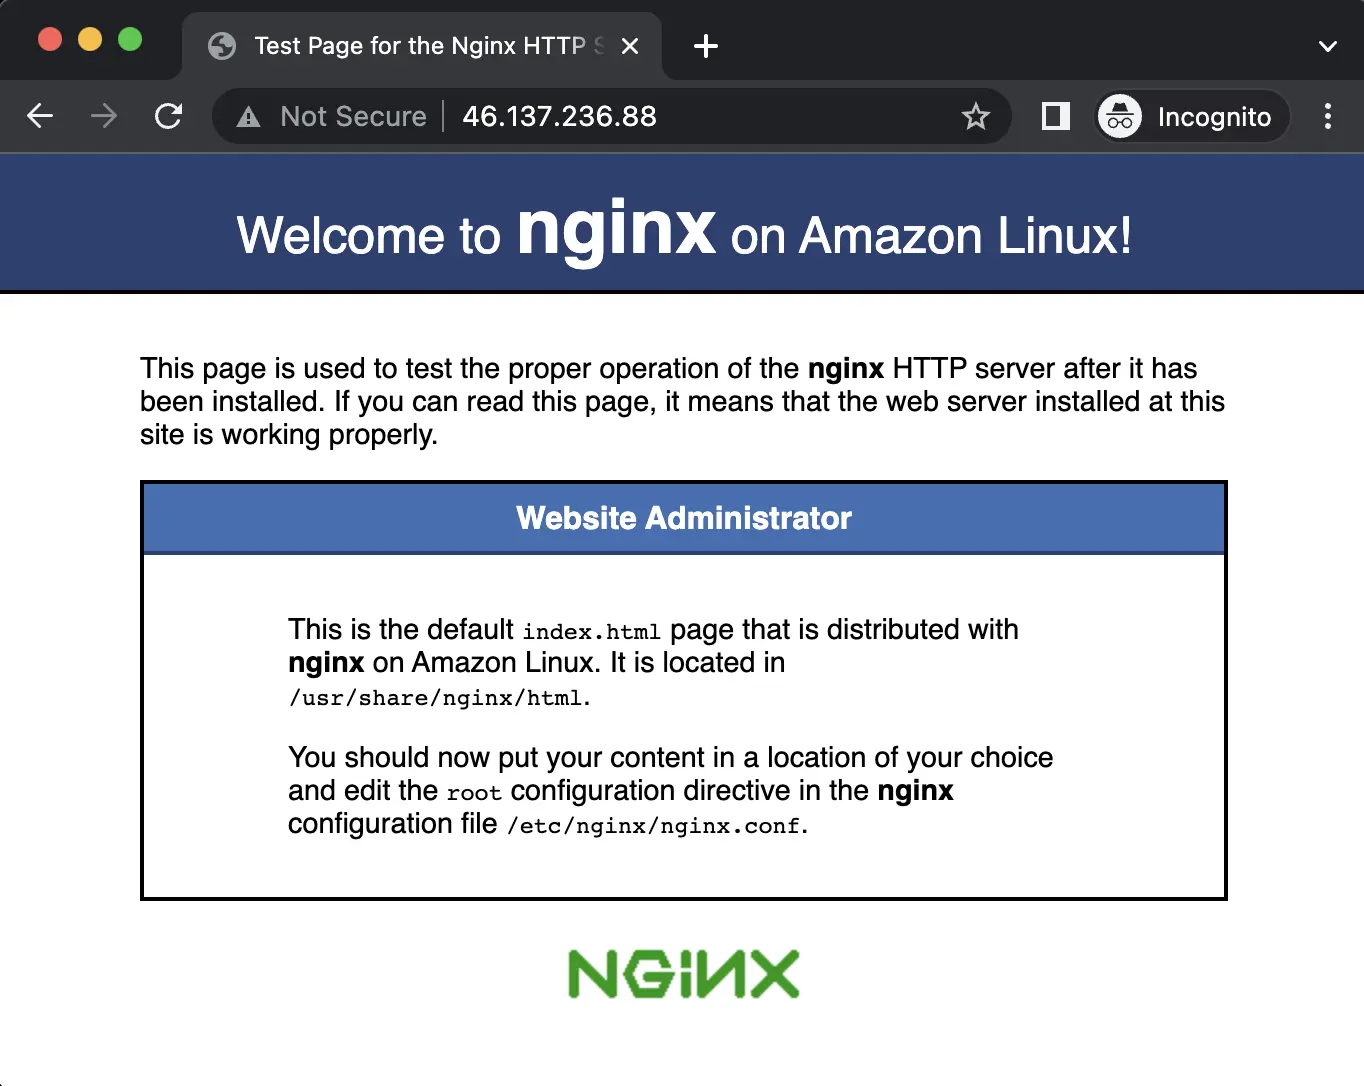 The default Nginx page in a web browser. The top of the page reads “Welcome to nginx on Amazon Linux!